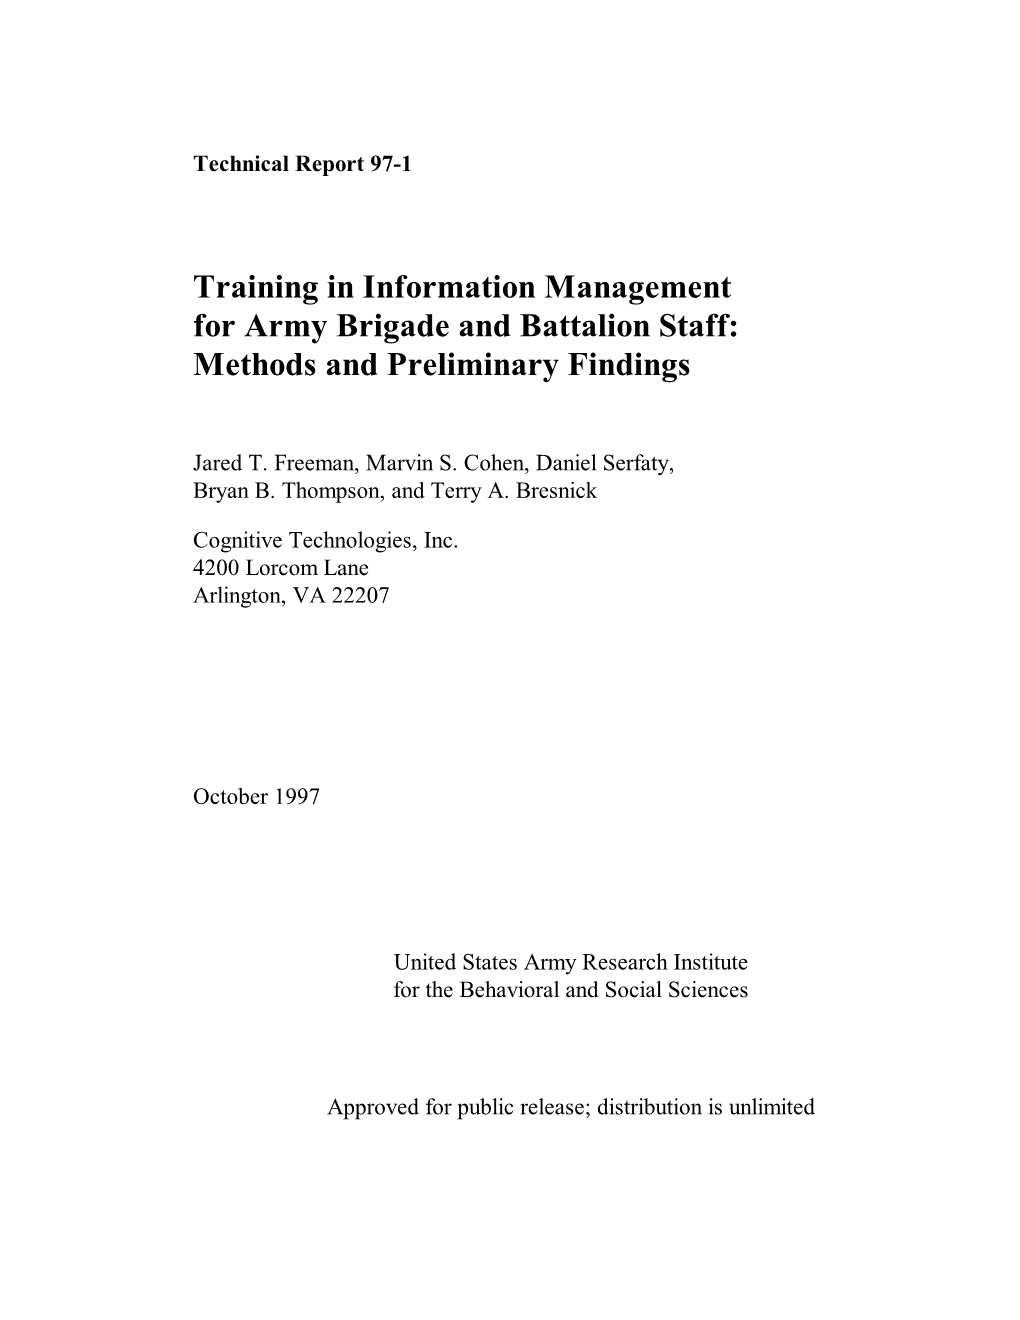 Training in Information Management for Army Brigade and Battalion Staff: Methods and Preliminary Findings